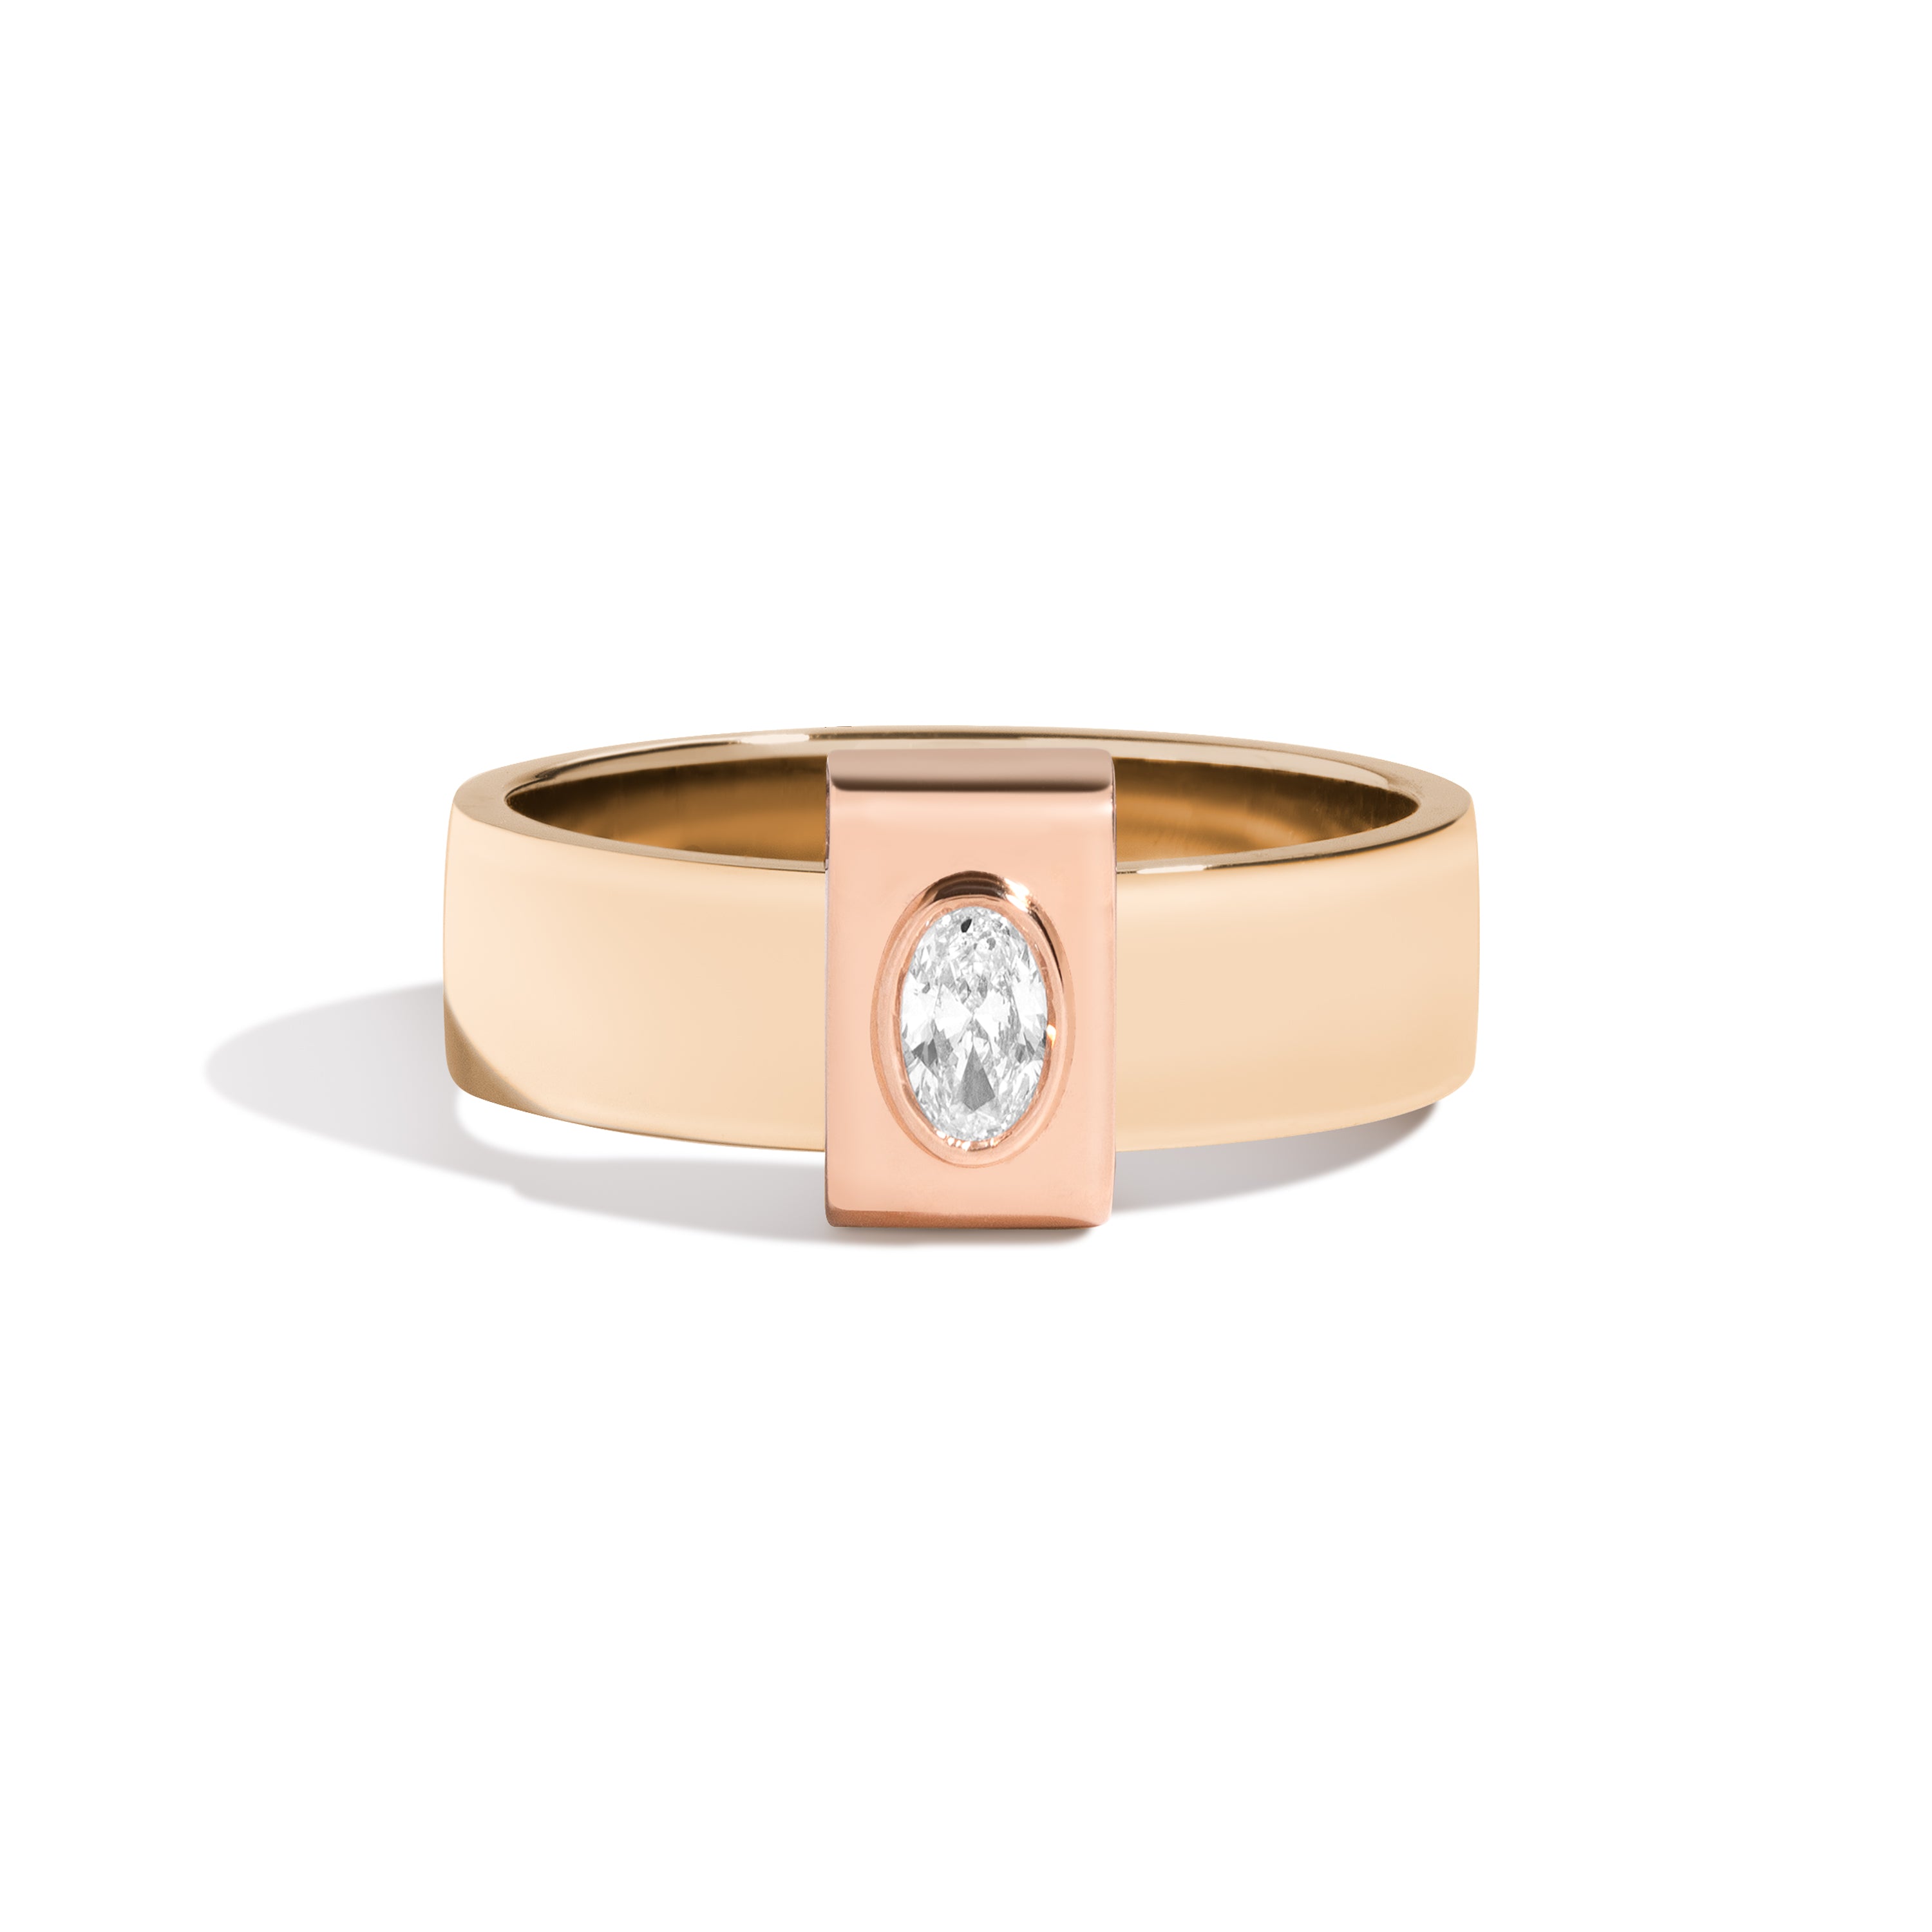 Shahla Karimi Signature 14K Yellow Gold 6mm Band With Oval 14K Rose Gold  Wrap